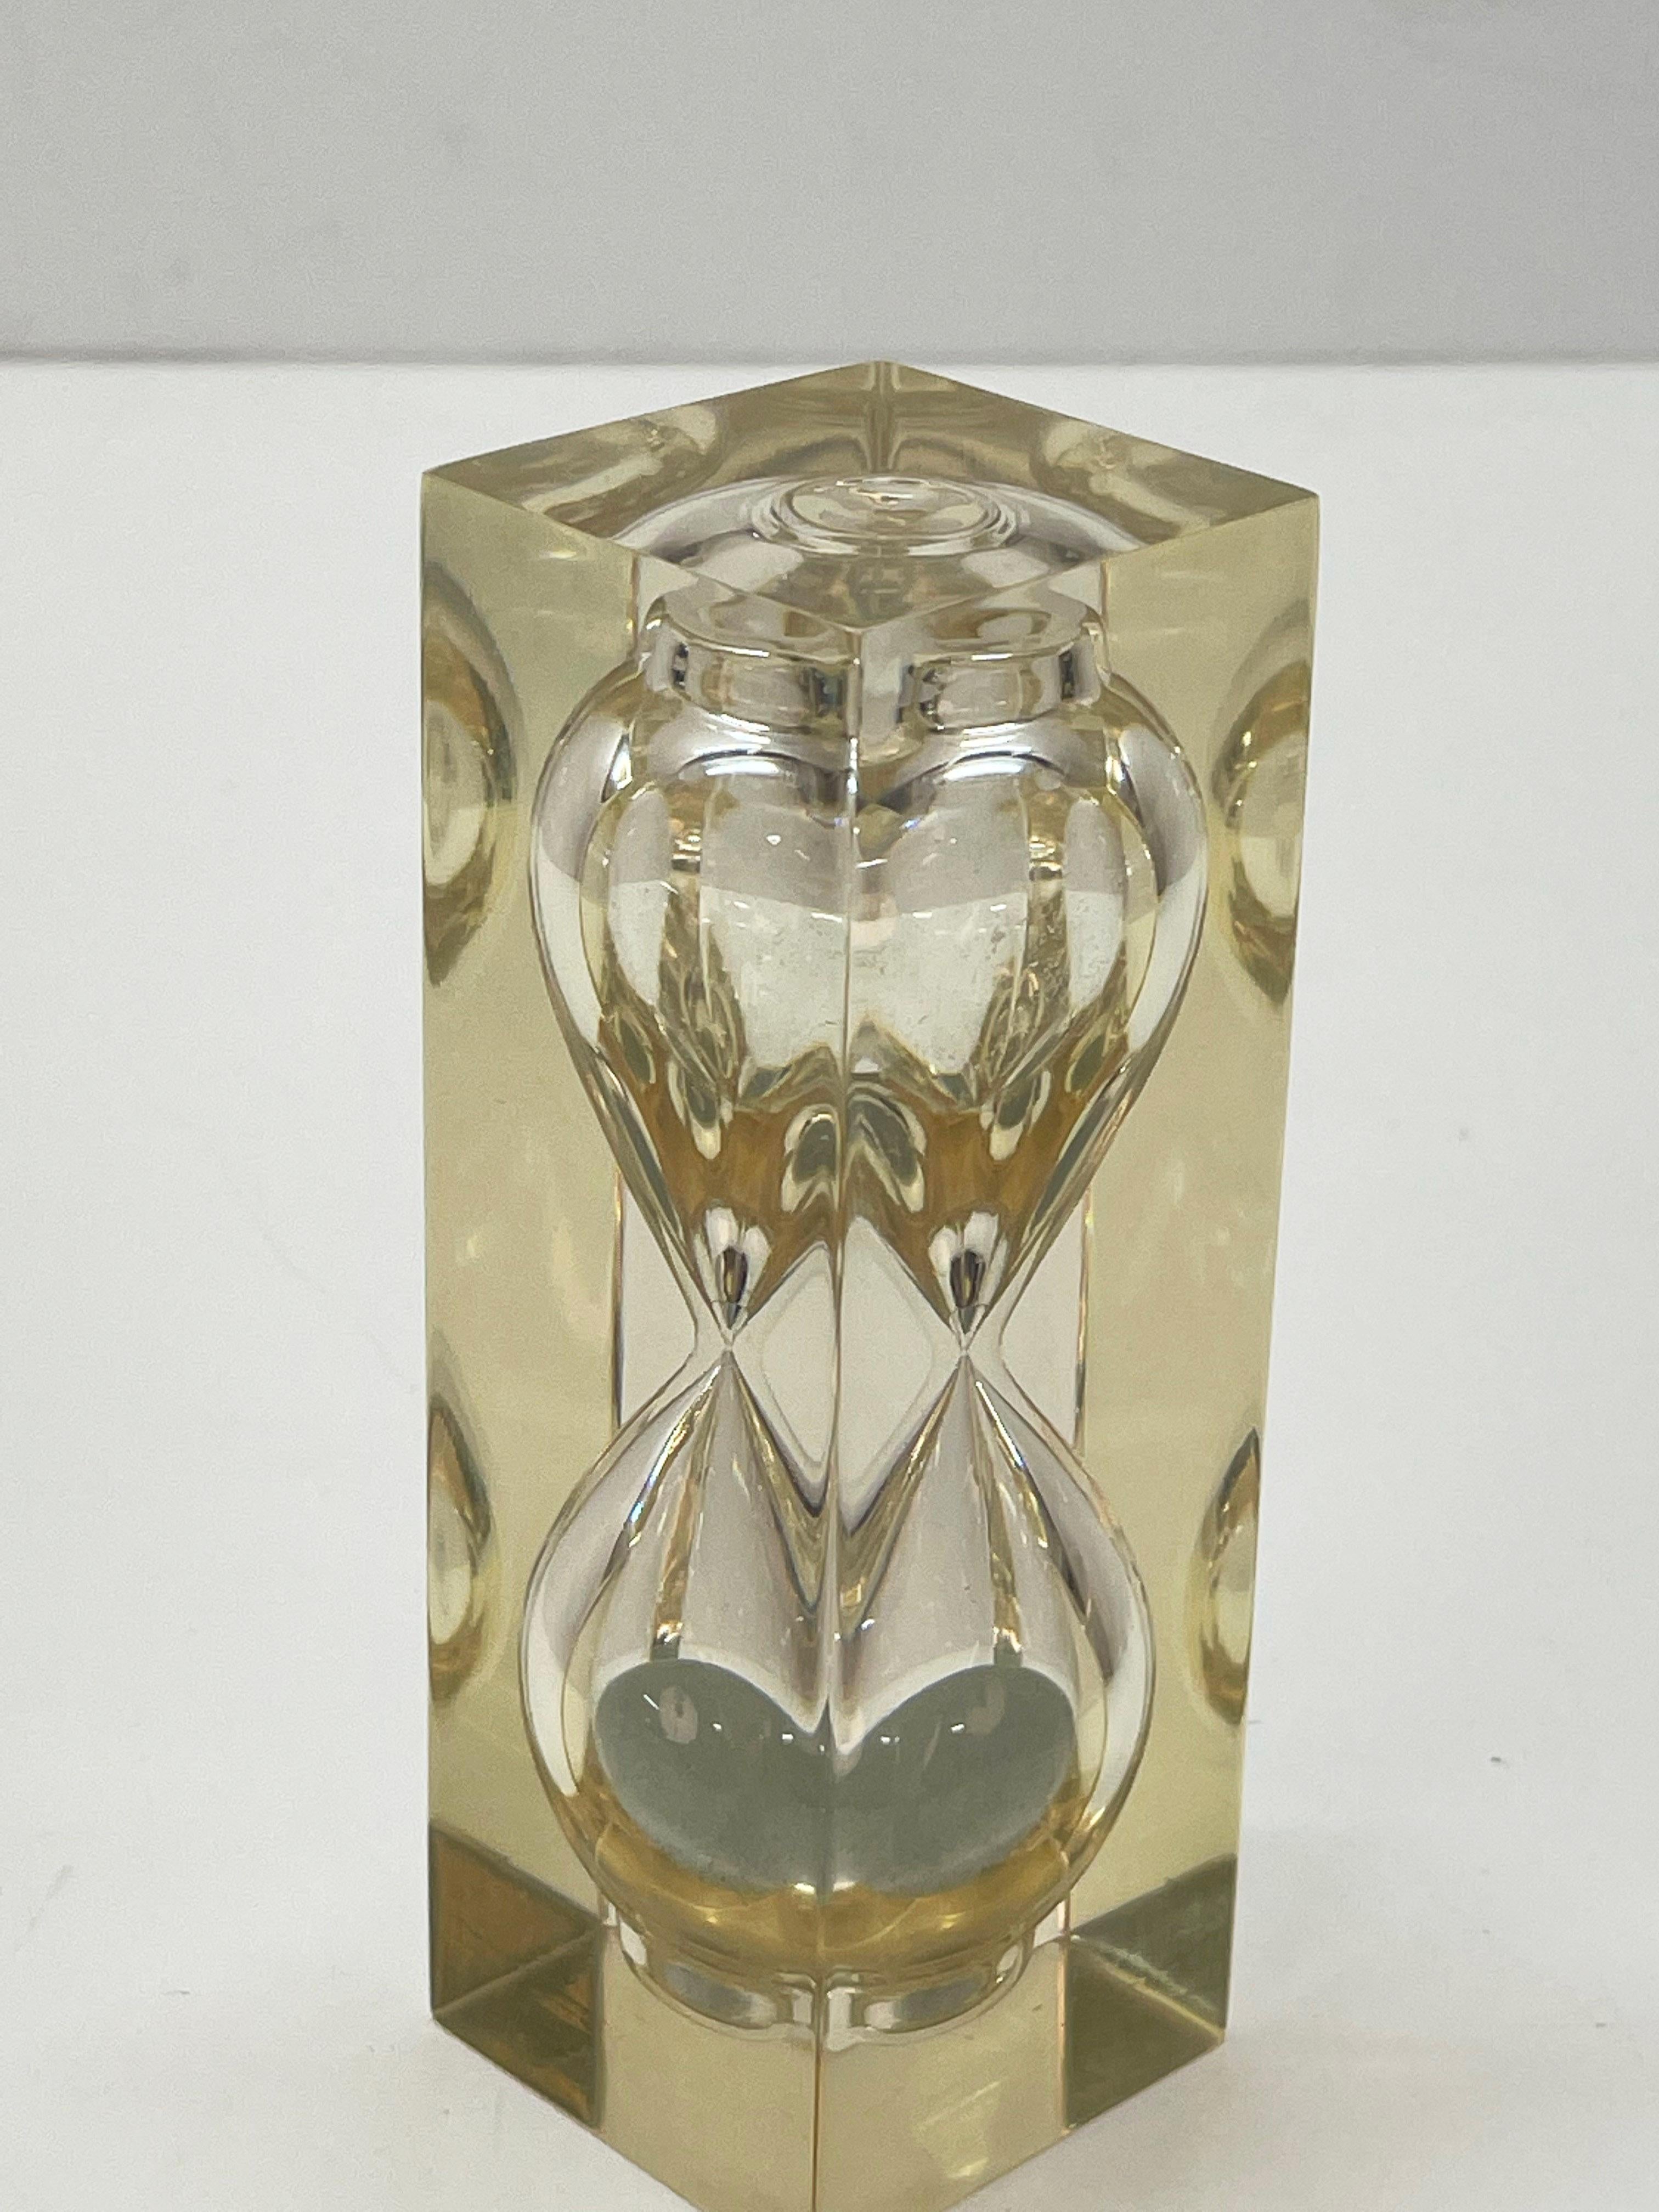 Midcentury Lucite Hourglass Sand Timer Sculpture After Charles Hollis Jones 1970 For Sale 7